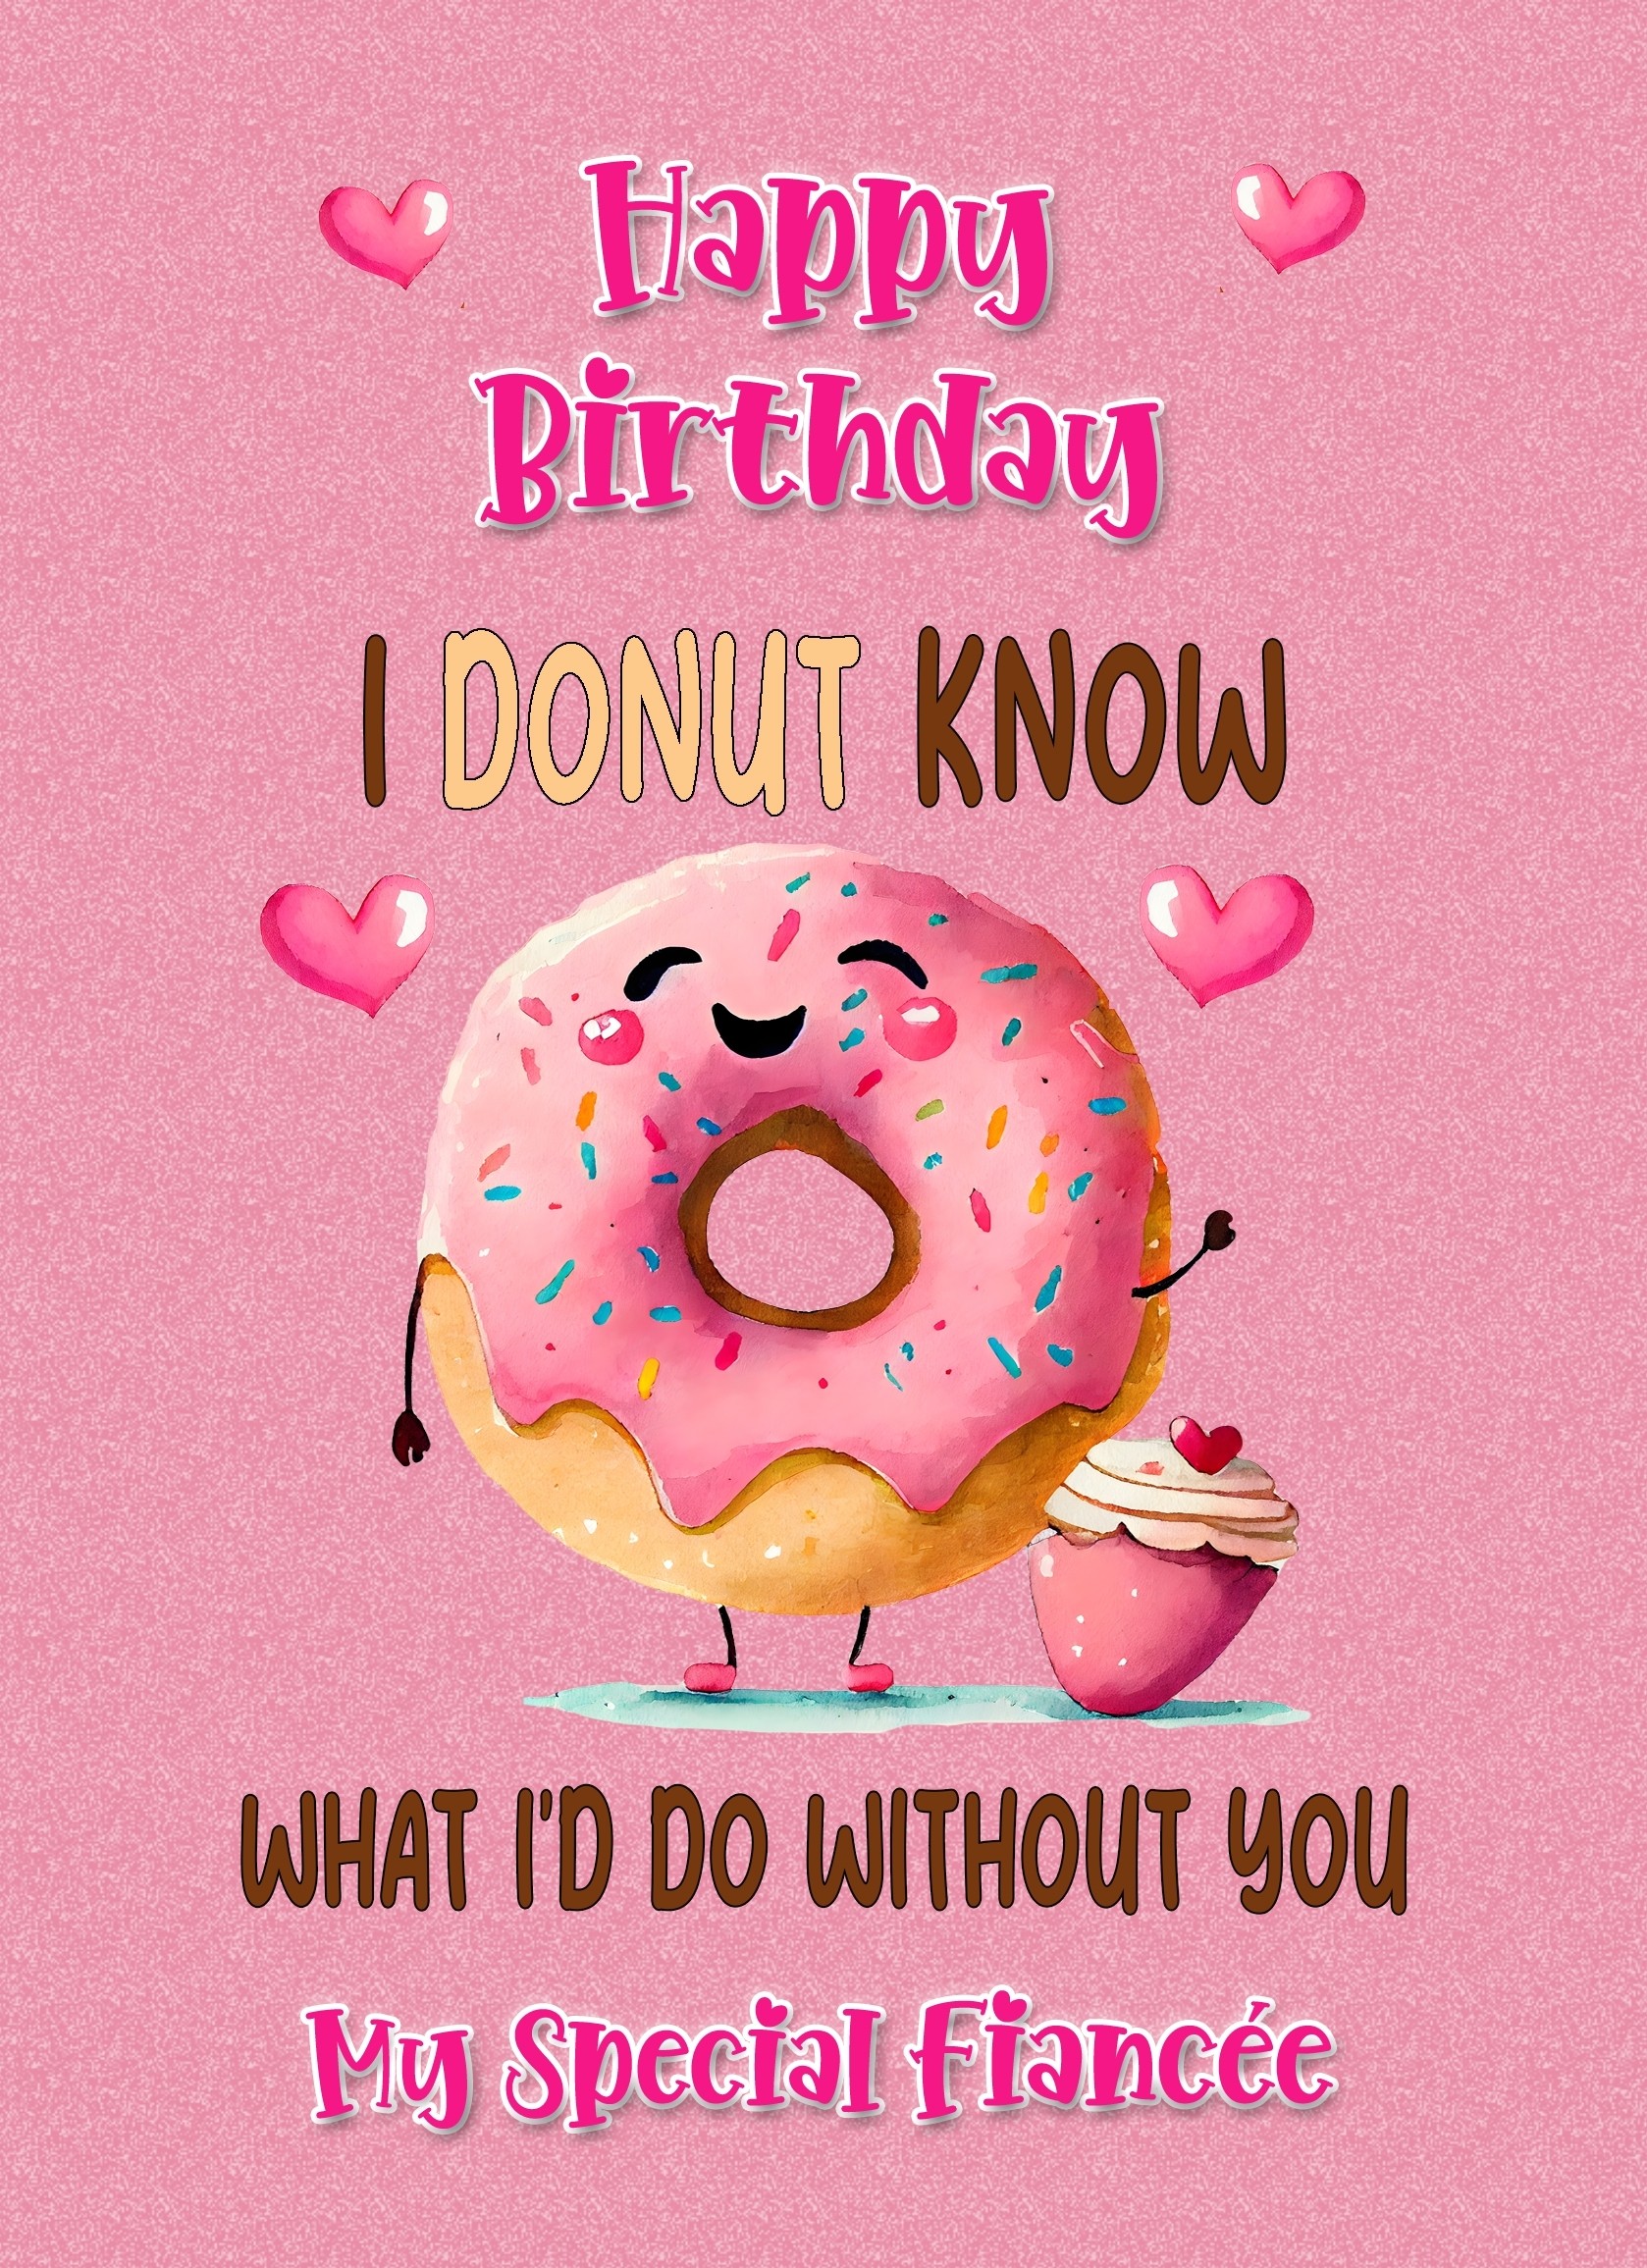 Funny Pun Romantic Birthday Card for Fiancee (Donut Know)